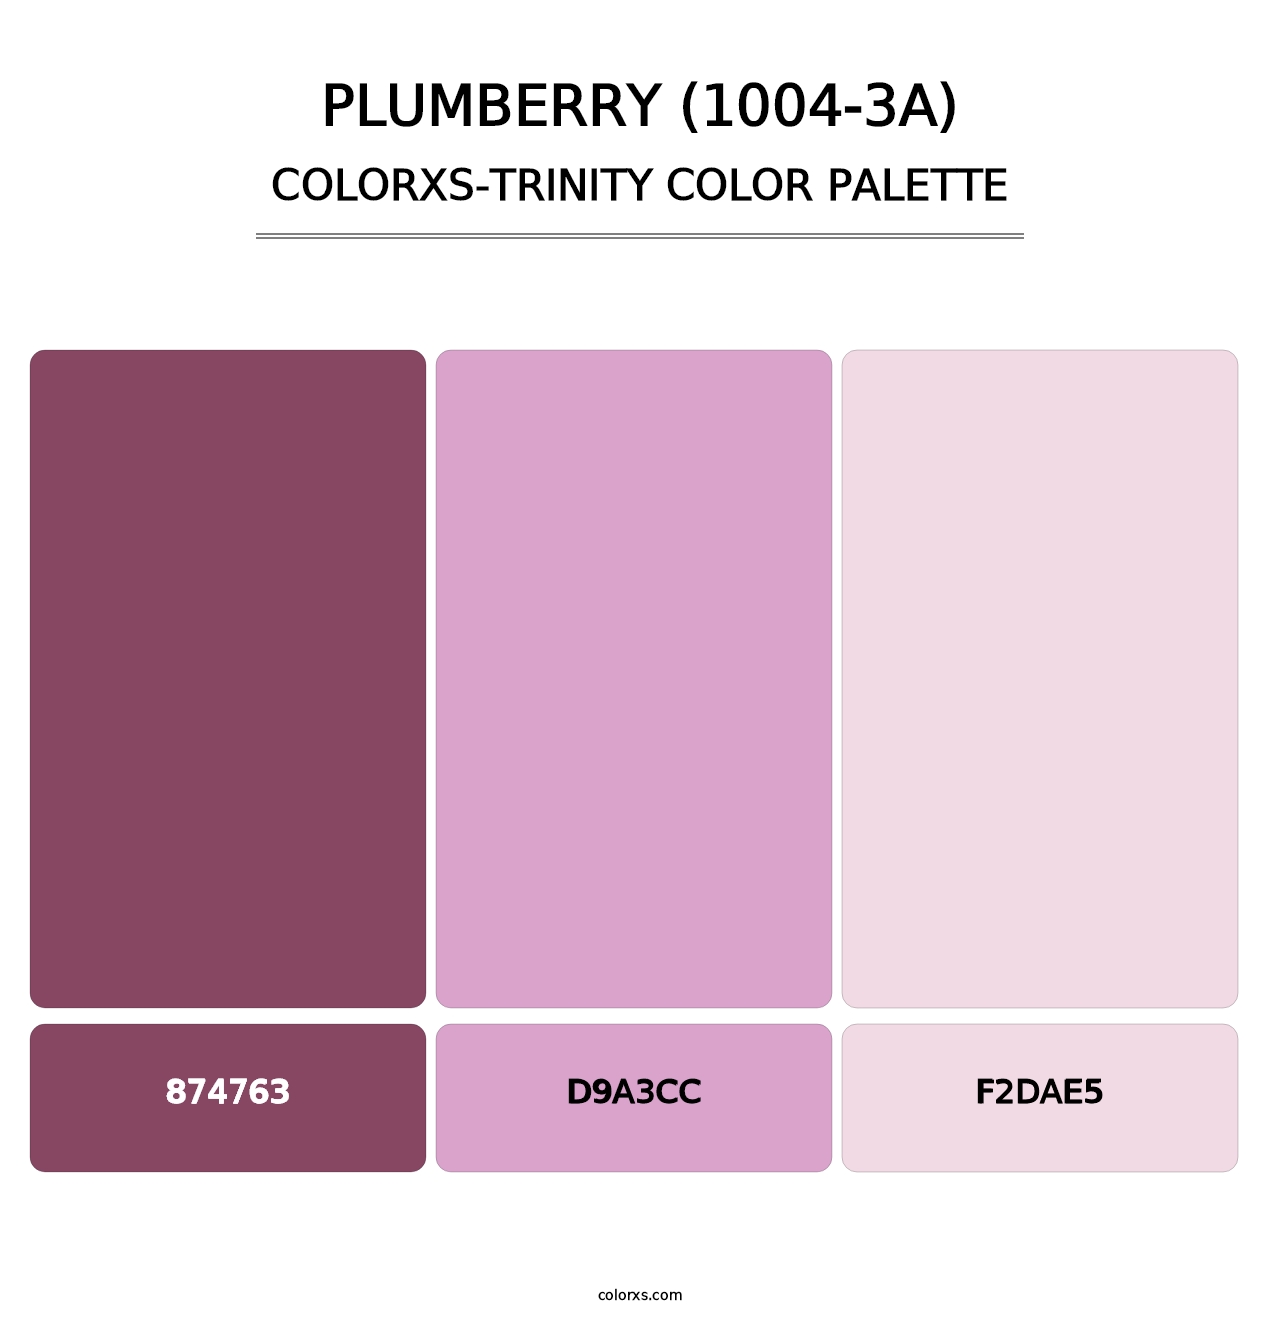 Plumberry (1004-3A) - Colorxs Trinity Palette